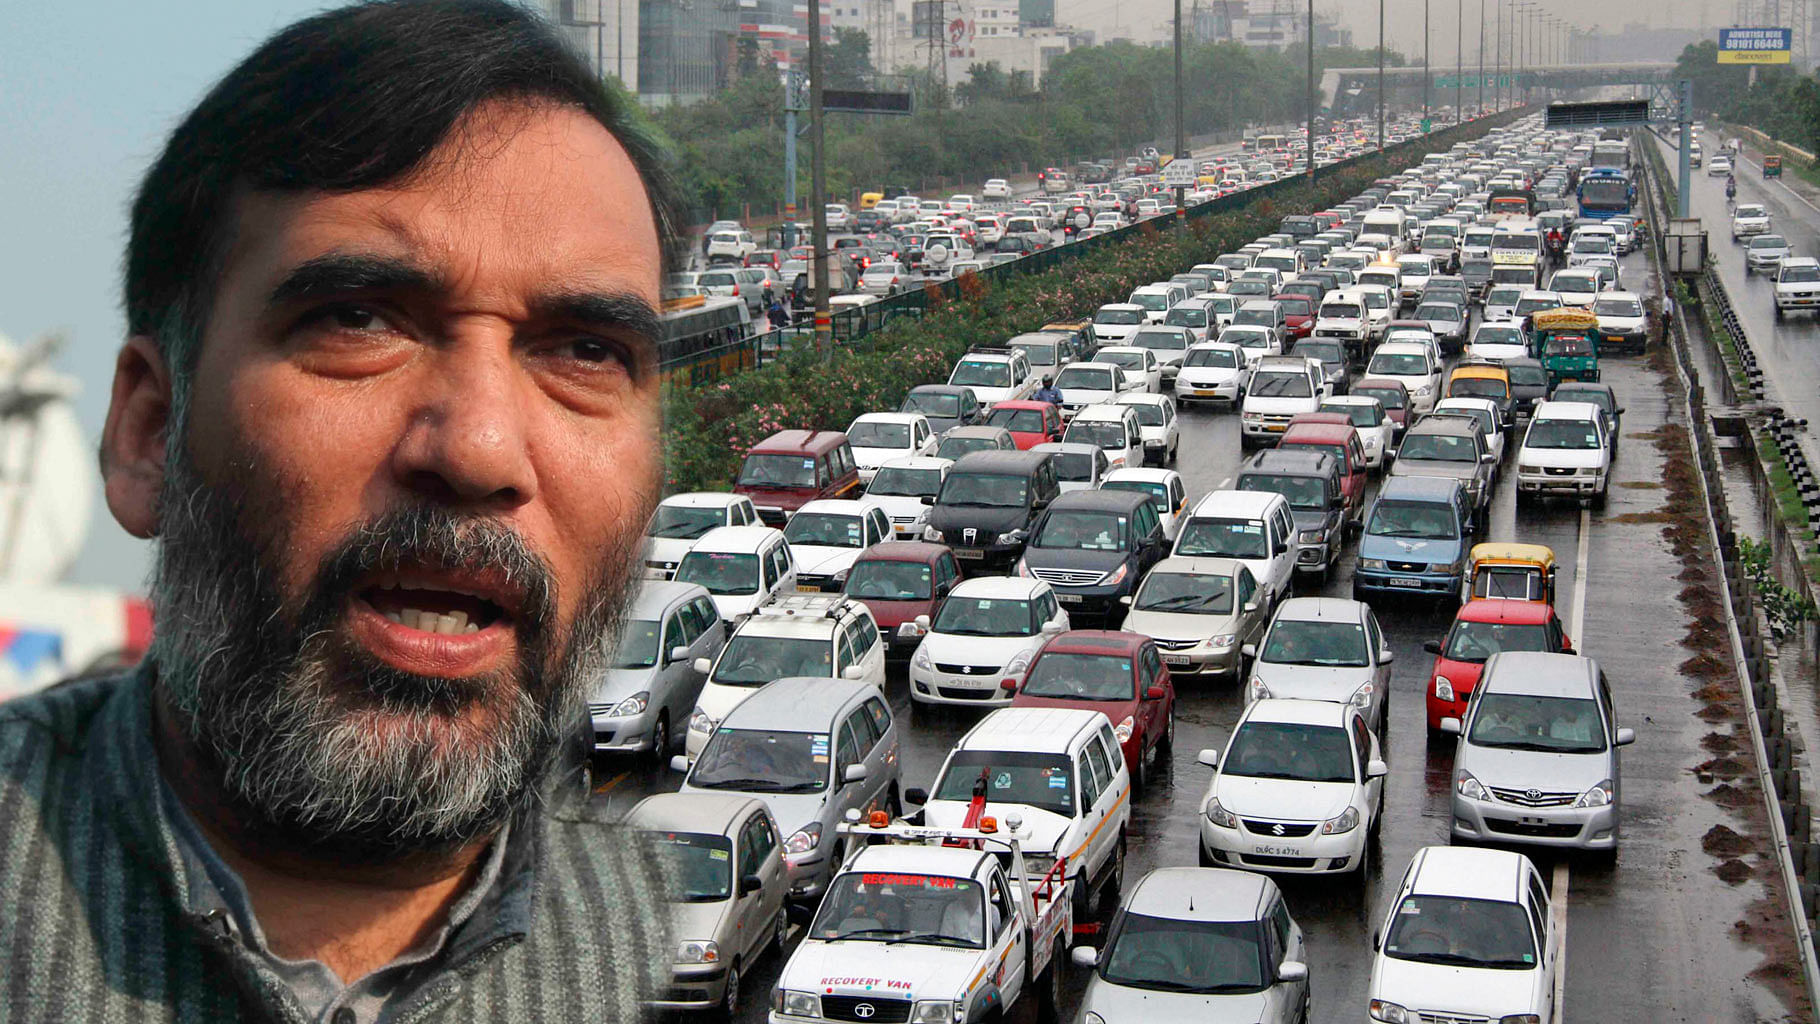 Transport Minister Gopal Rai (on the left) and traffic on the roads of Delhi. (Photo: <b>The Quint</b>)